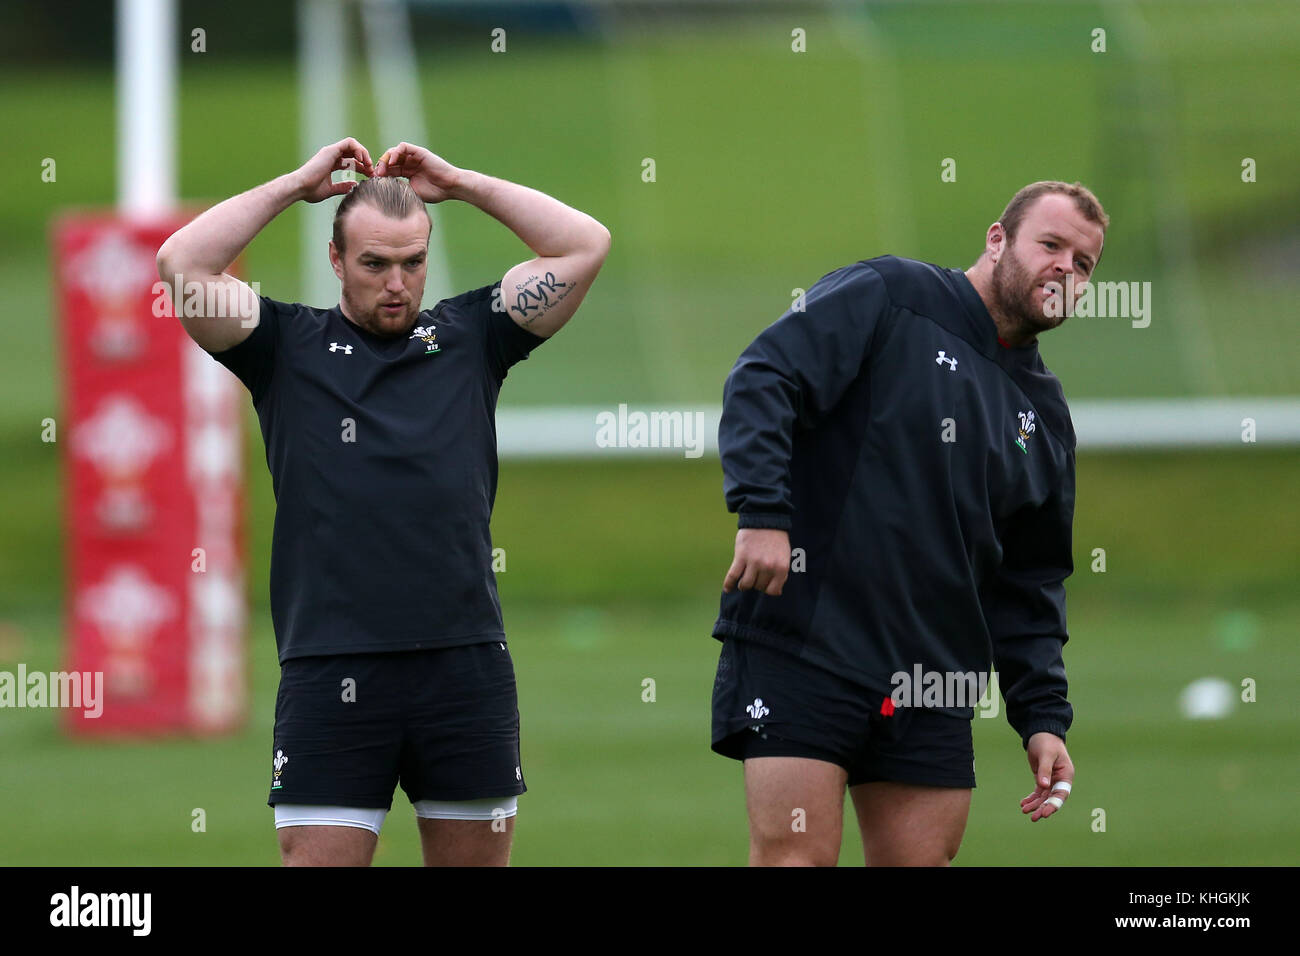 Cardiff, UK. 16th Nov, 2017. Kristian Dacey, the Wales rugby player (l) with Scott Andrews, the Wales rugby player (r) during the Wales rugby team training session at the Vale Resort Hotel in Hensol, near Cardiff, South Wales on Thursday 16th November 2017. the team are preparing for their Autumn International series match against Georgia this weekend. pic by Credit: Andrew Orchard/Alamy Live News Stock Photo